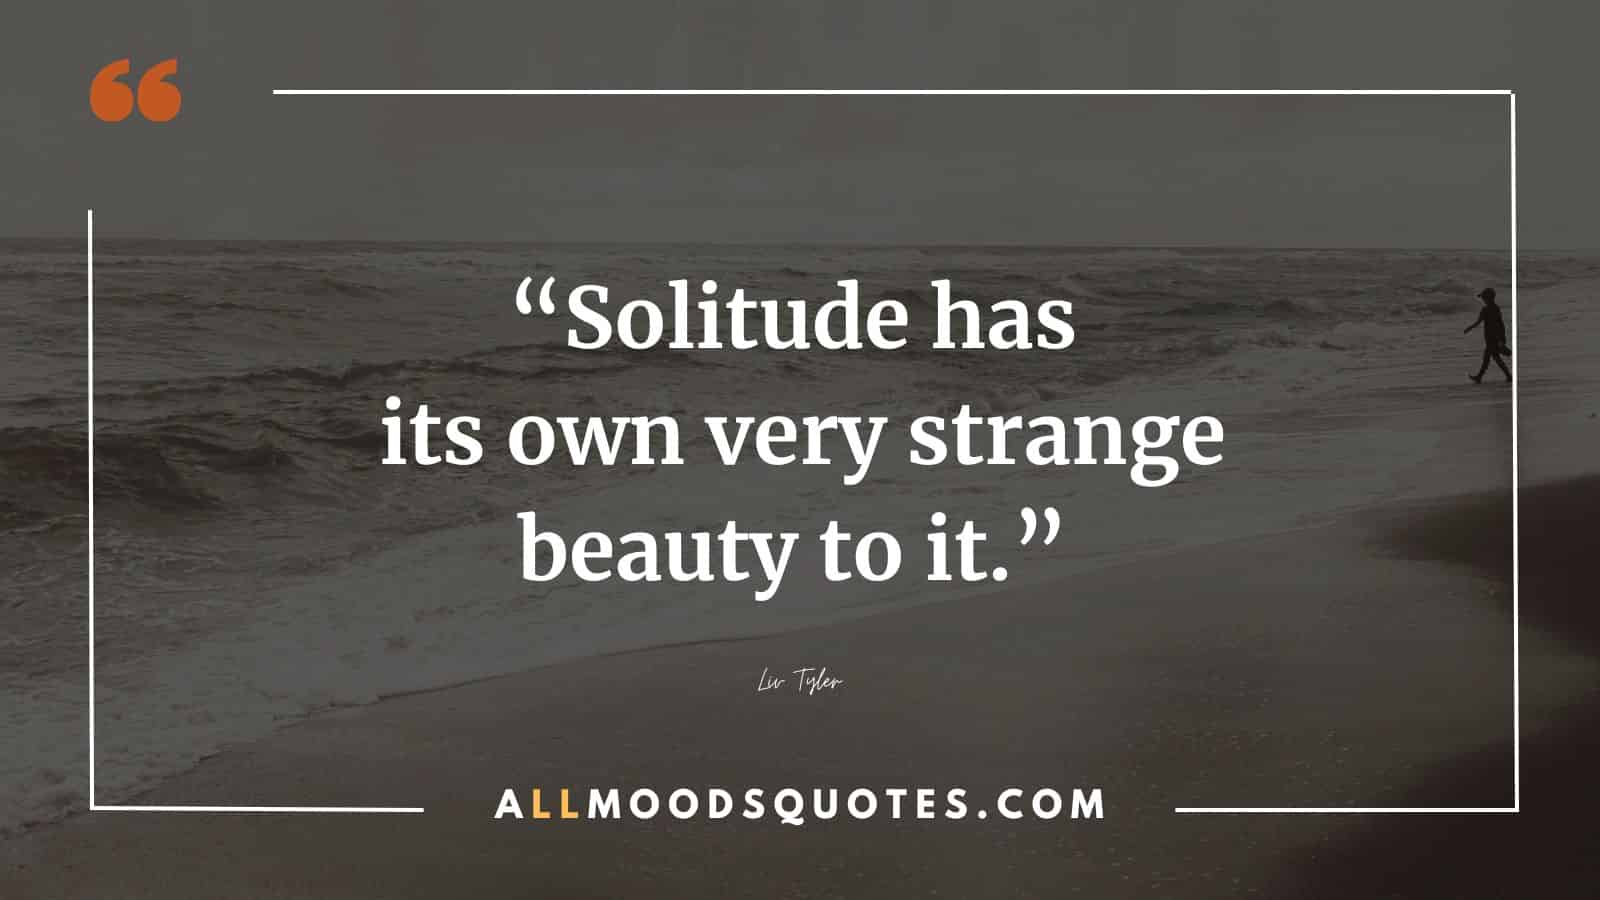 Solitude has its own very strange beauty to it.
Liv Tyler